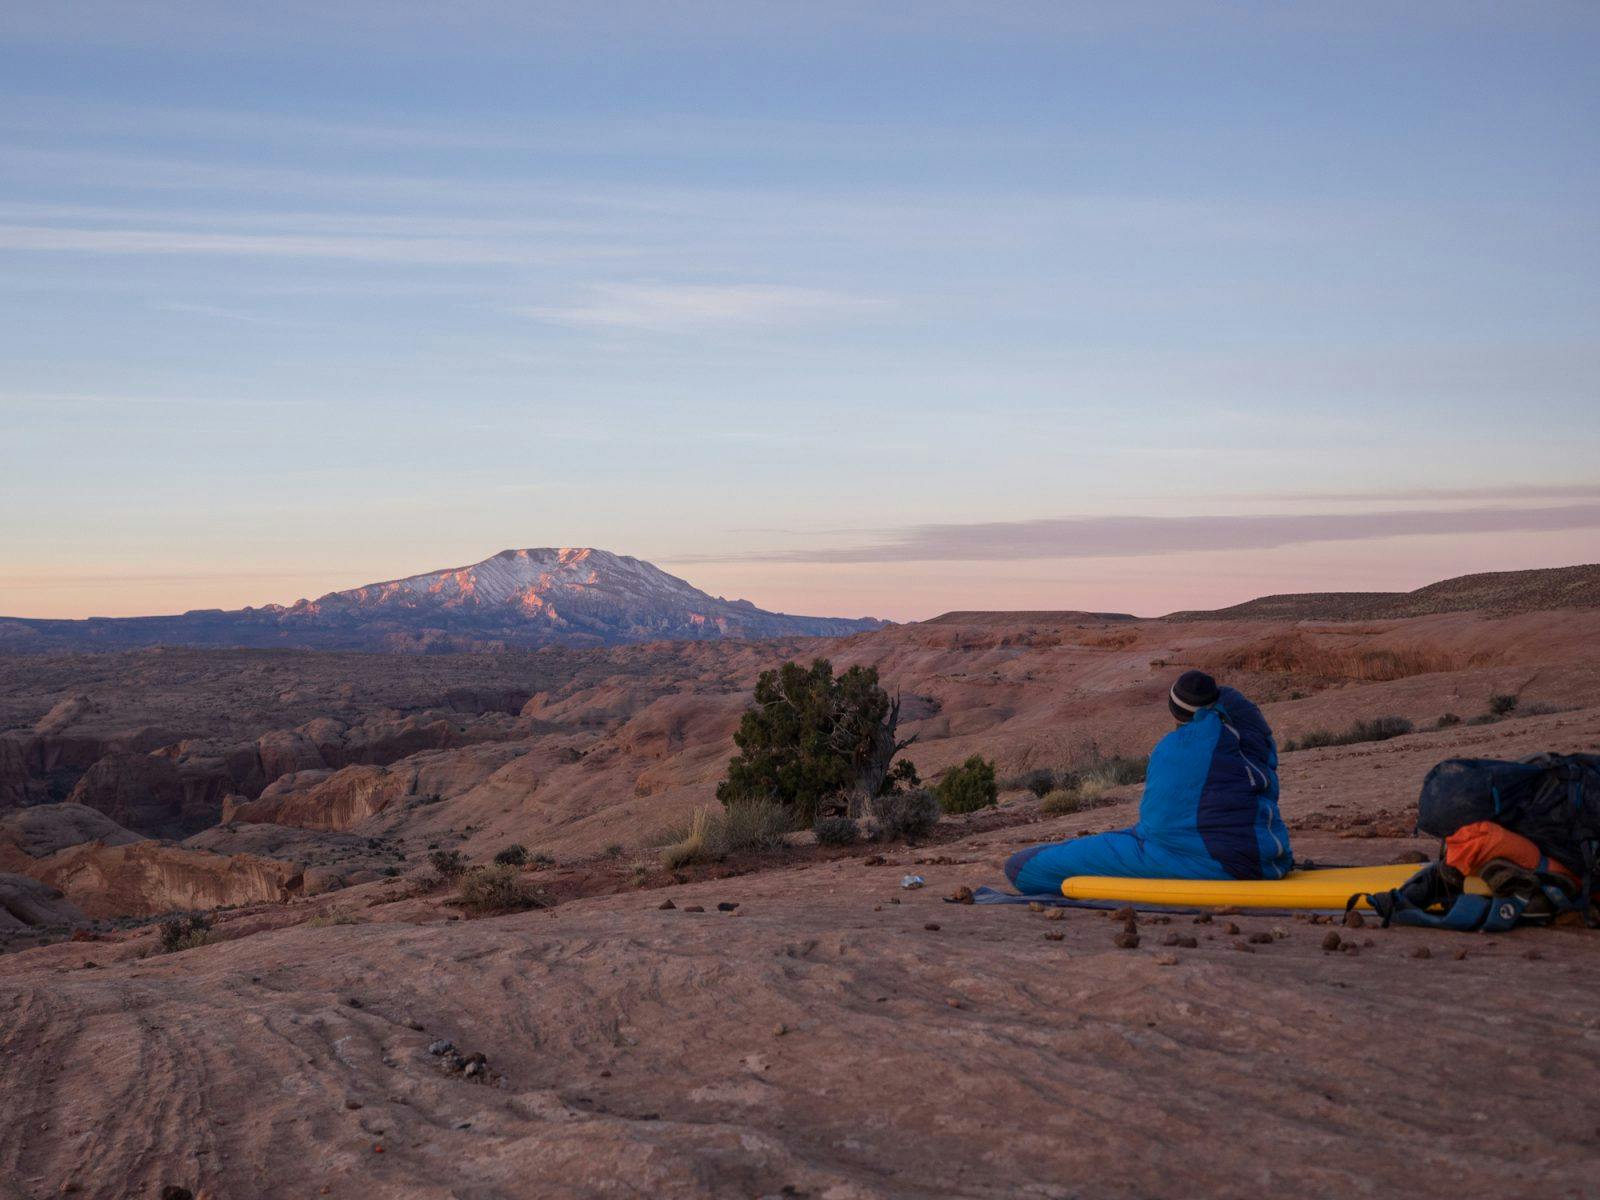 On our third day of hiking we awoke to view Navajo Mountain lit up in spectacular fashion.